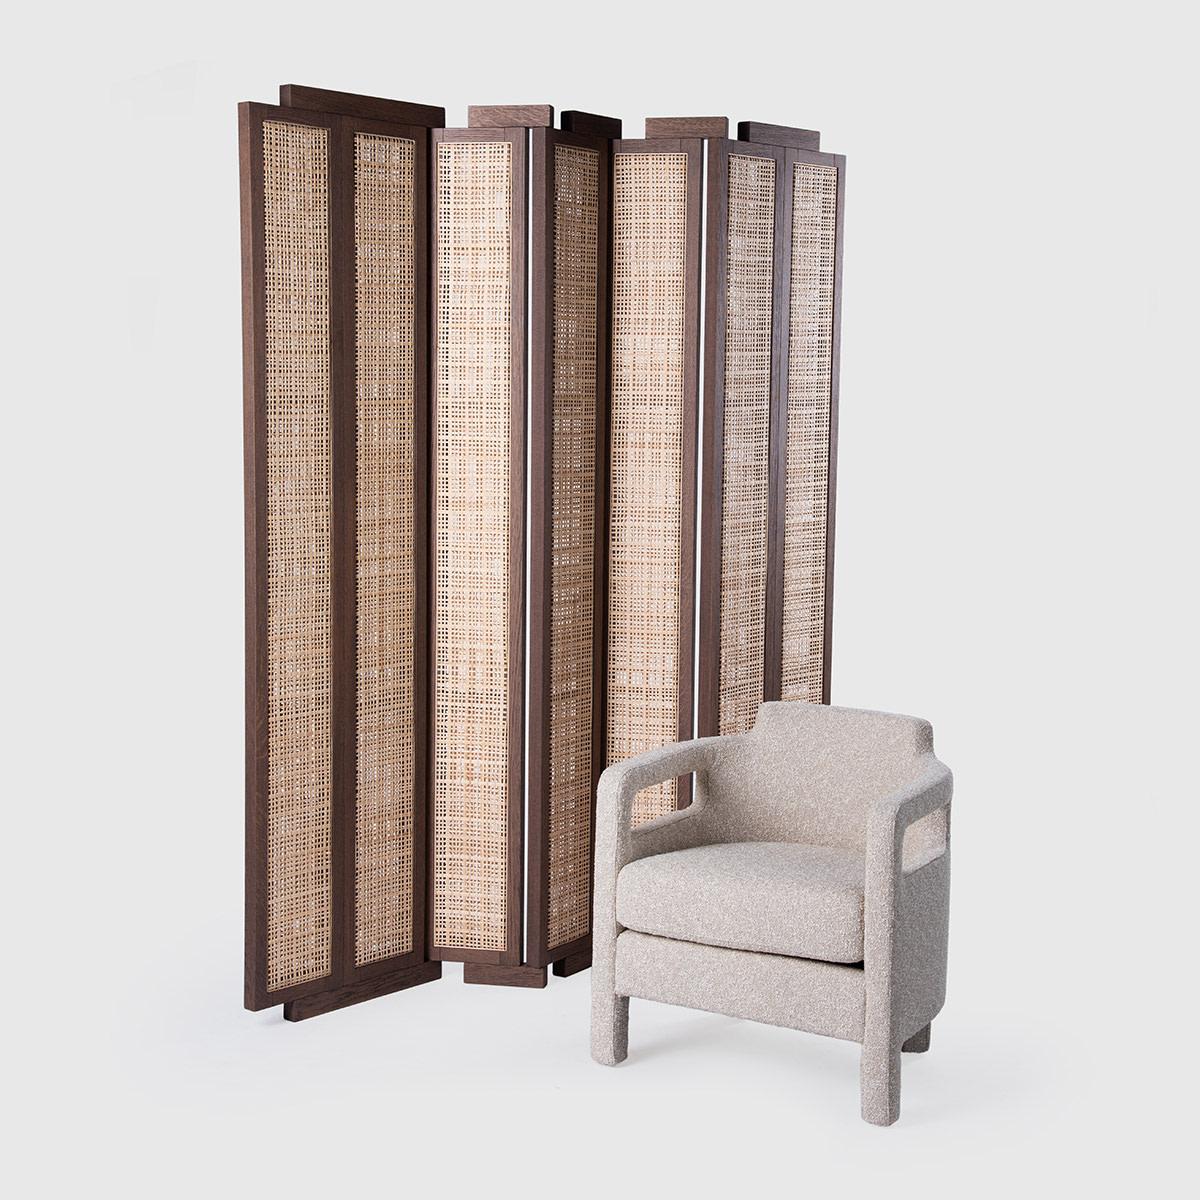 Organic Modern Contemporary Wood Screen 'Henley Street' by Man of Parts, Whiskey Oak and Cane For Sale